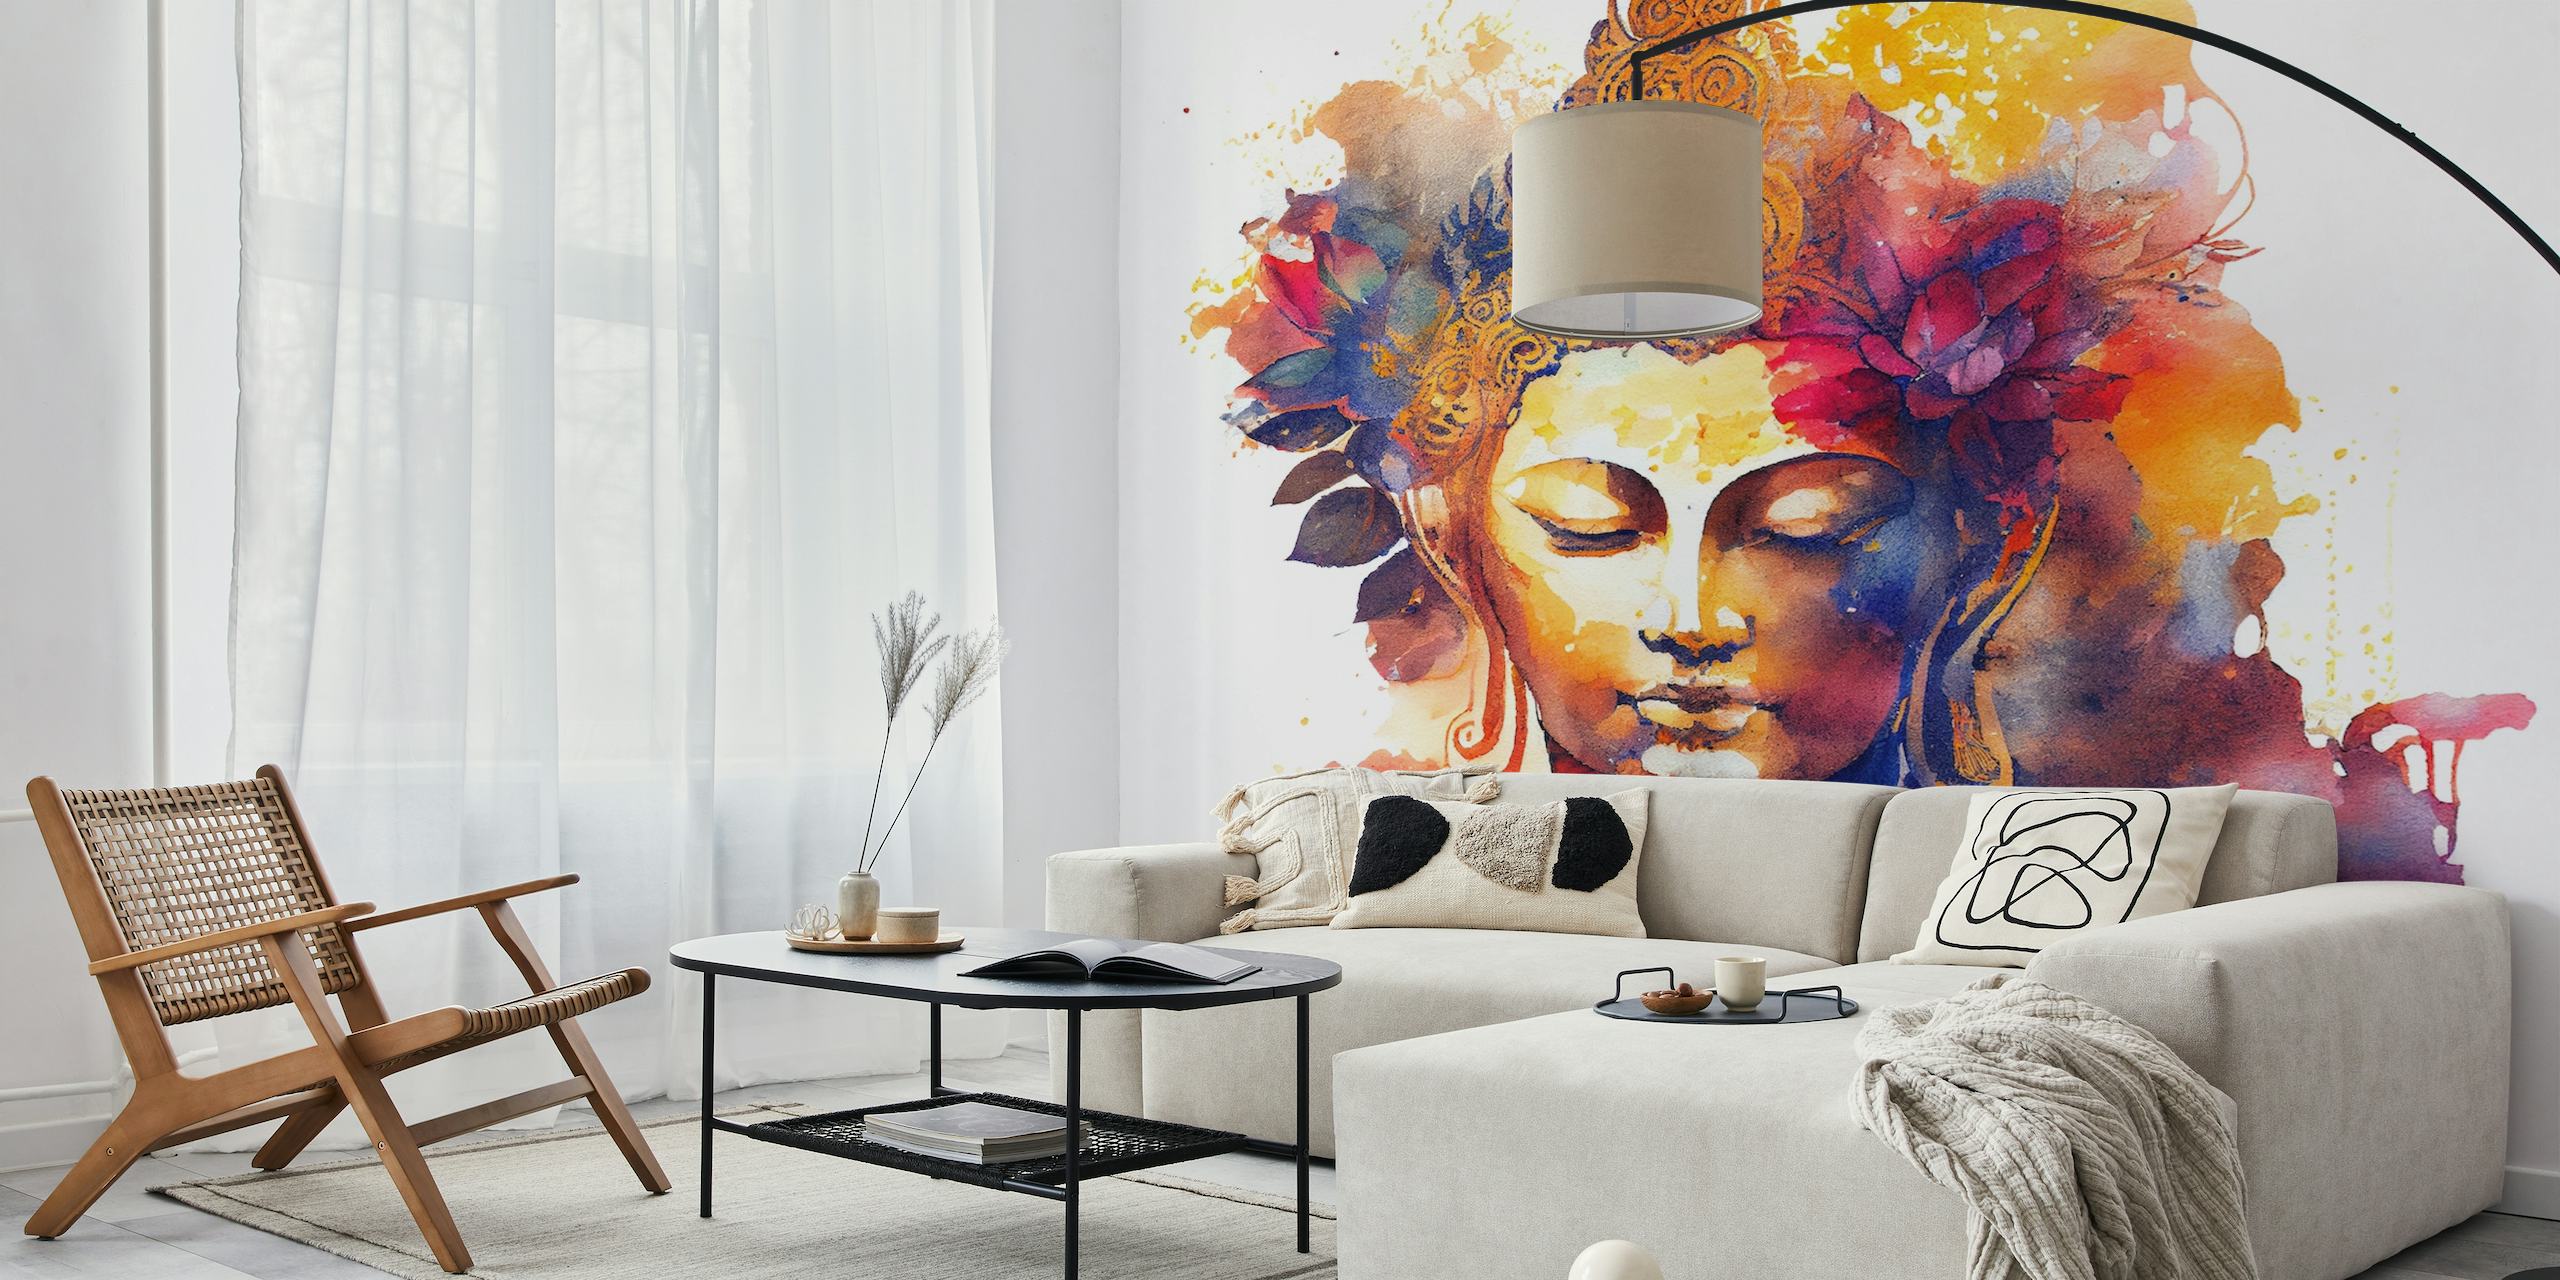 Watercolor Buddha mural with warm hues and serene ambiance